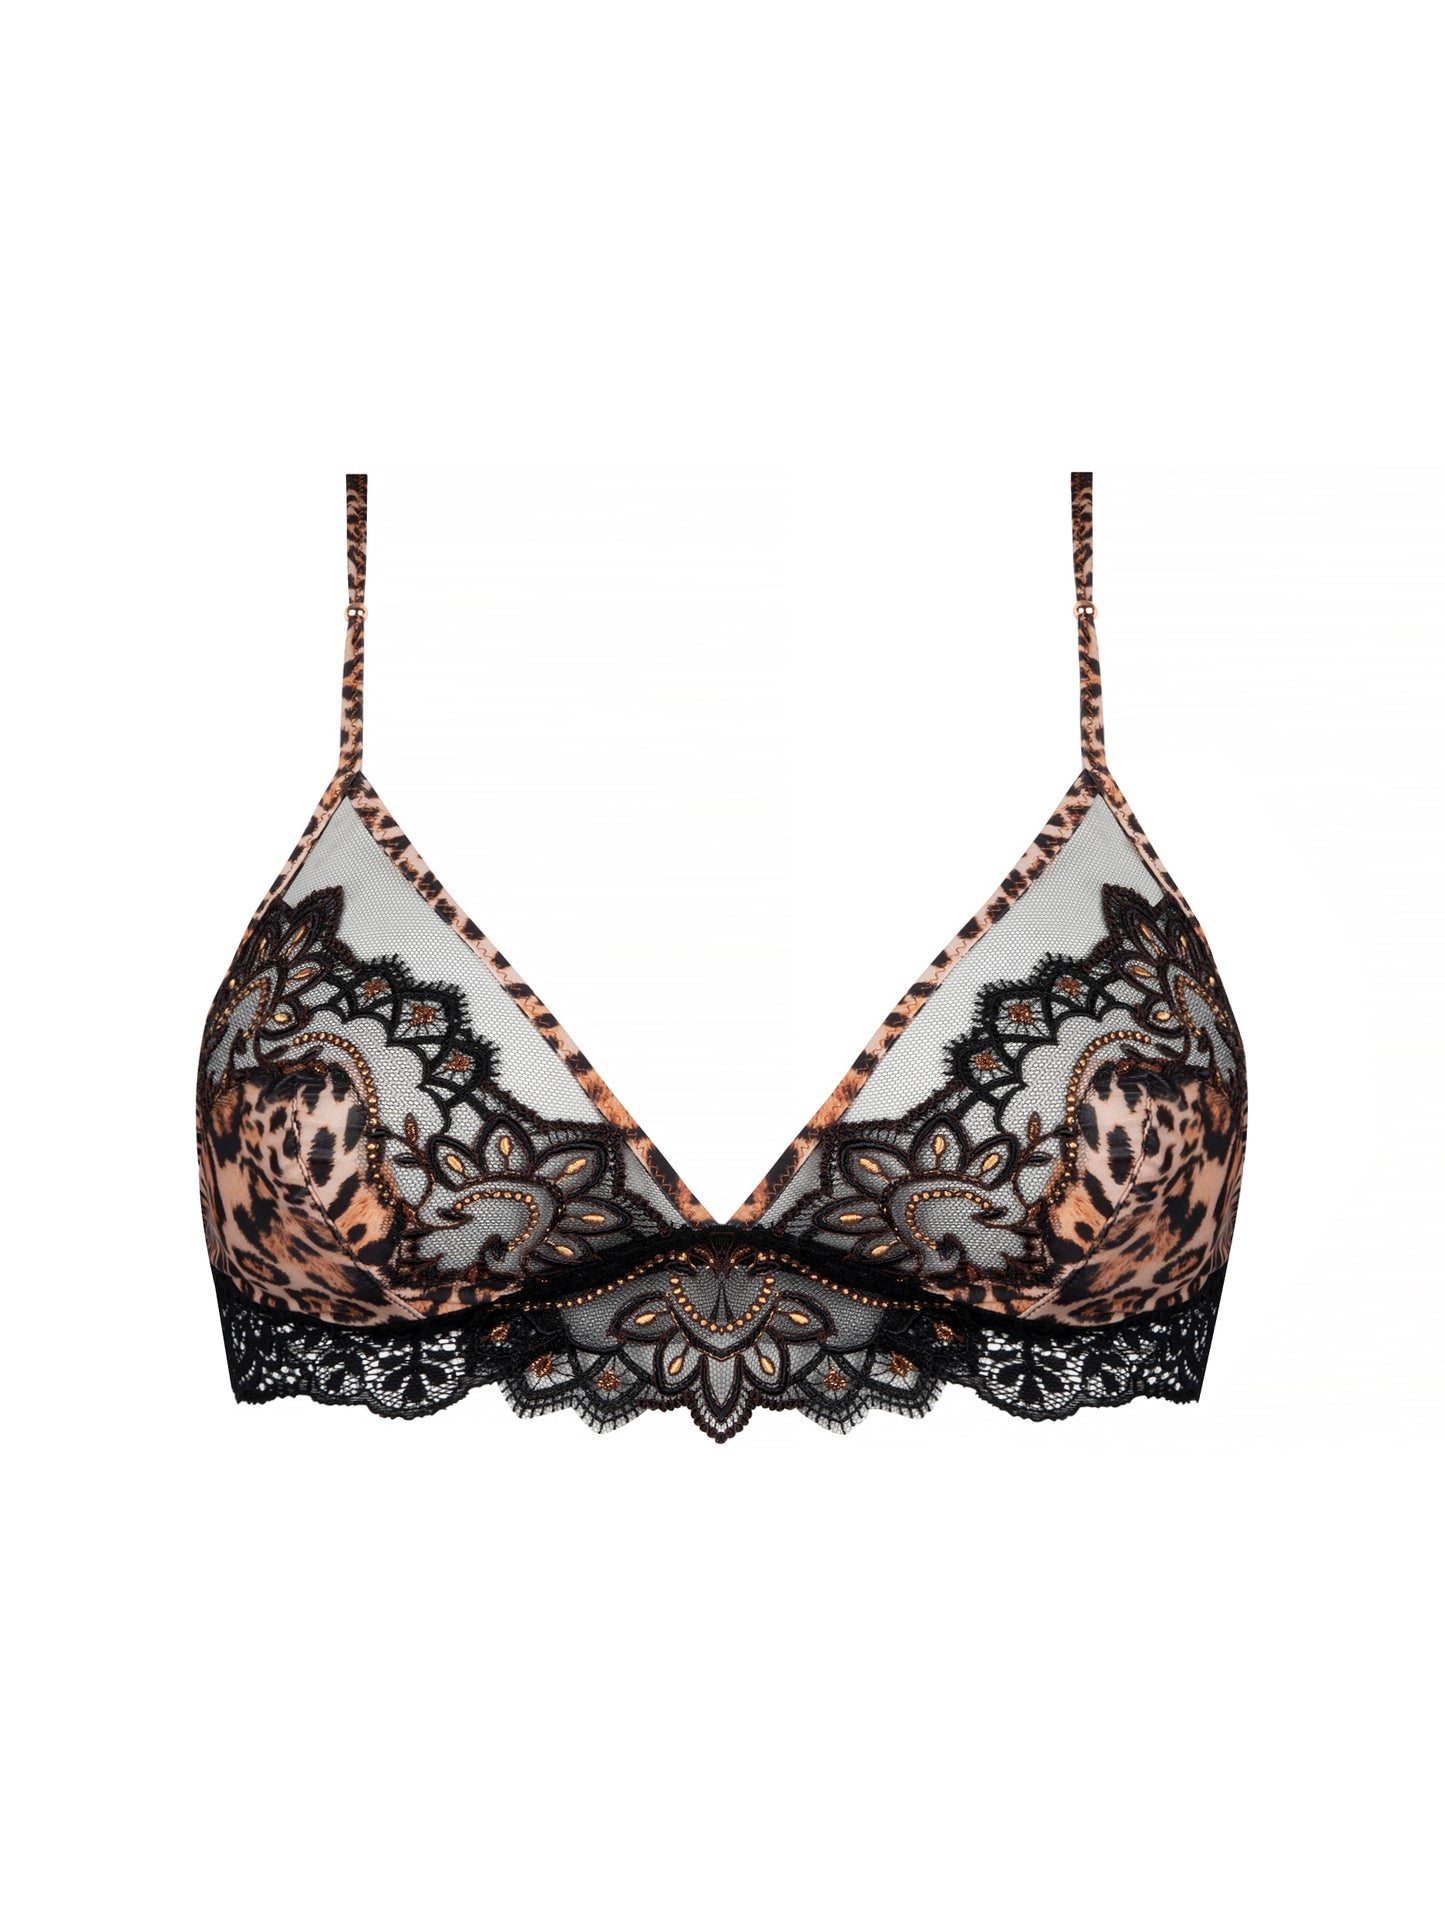 Fauve Amour in Amber Panthere Wireless Bra By Lise Charmel - S-L